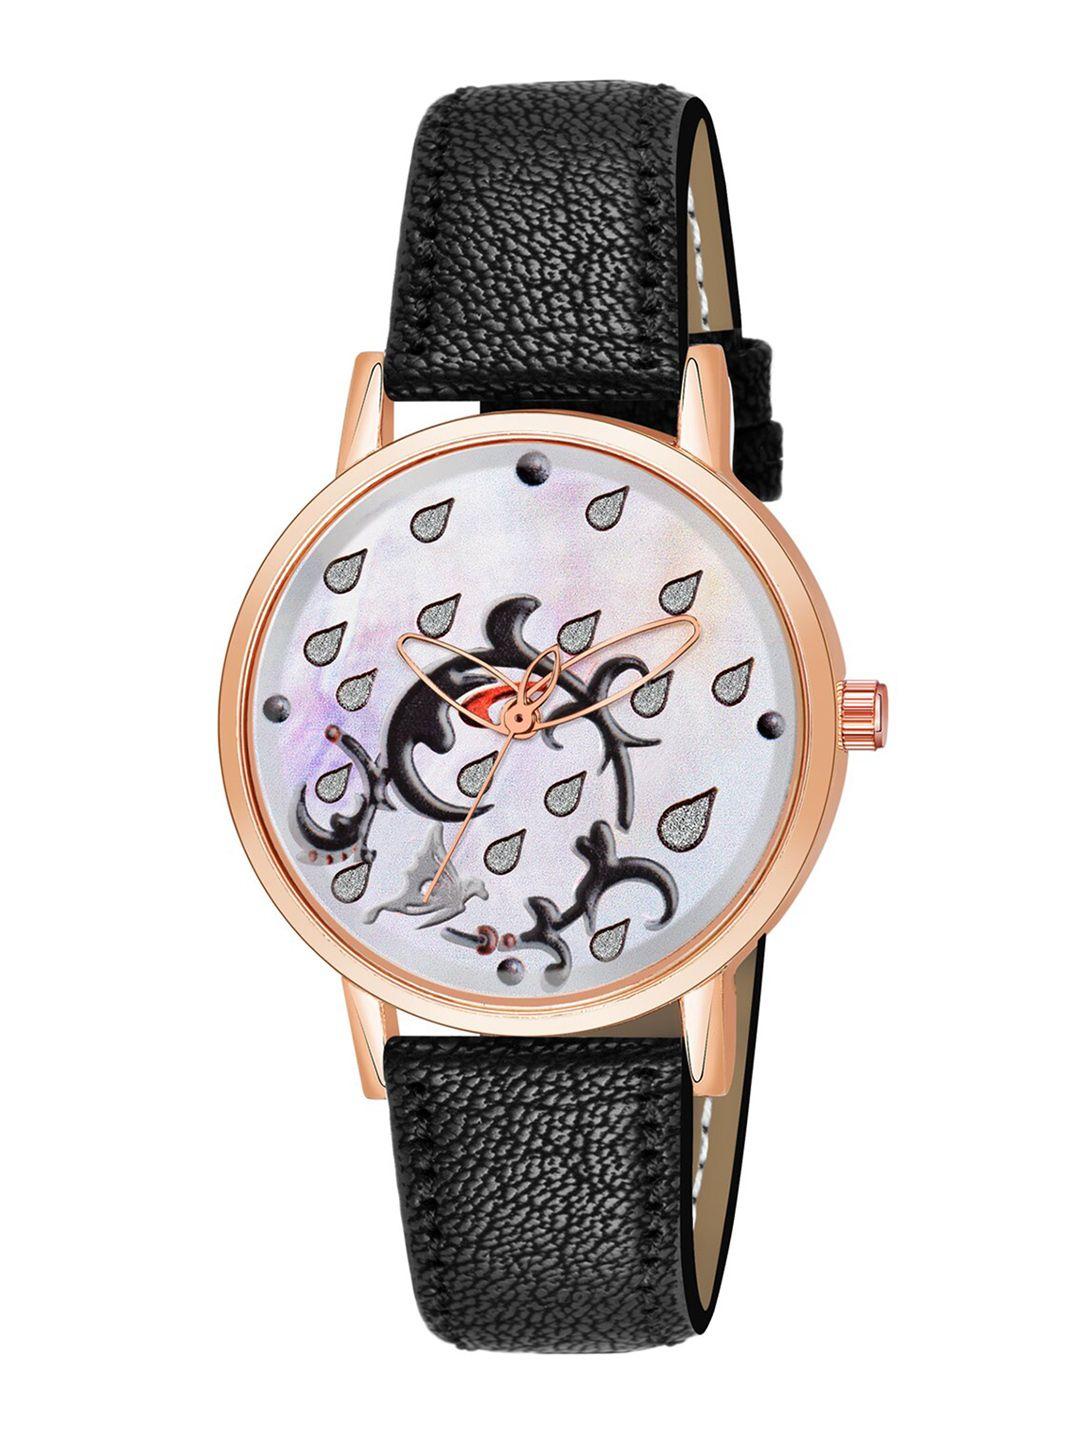 wuxi women brass printed dial & leather straps analogue watch m-876 black